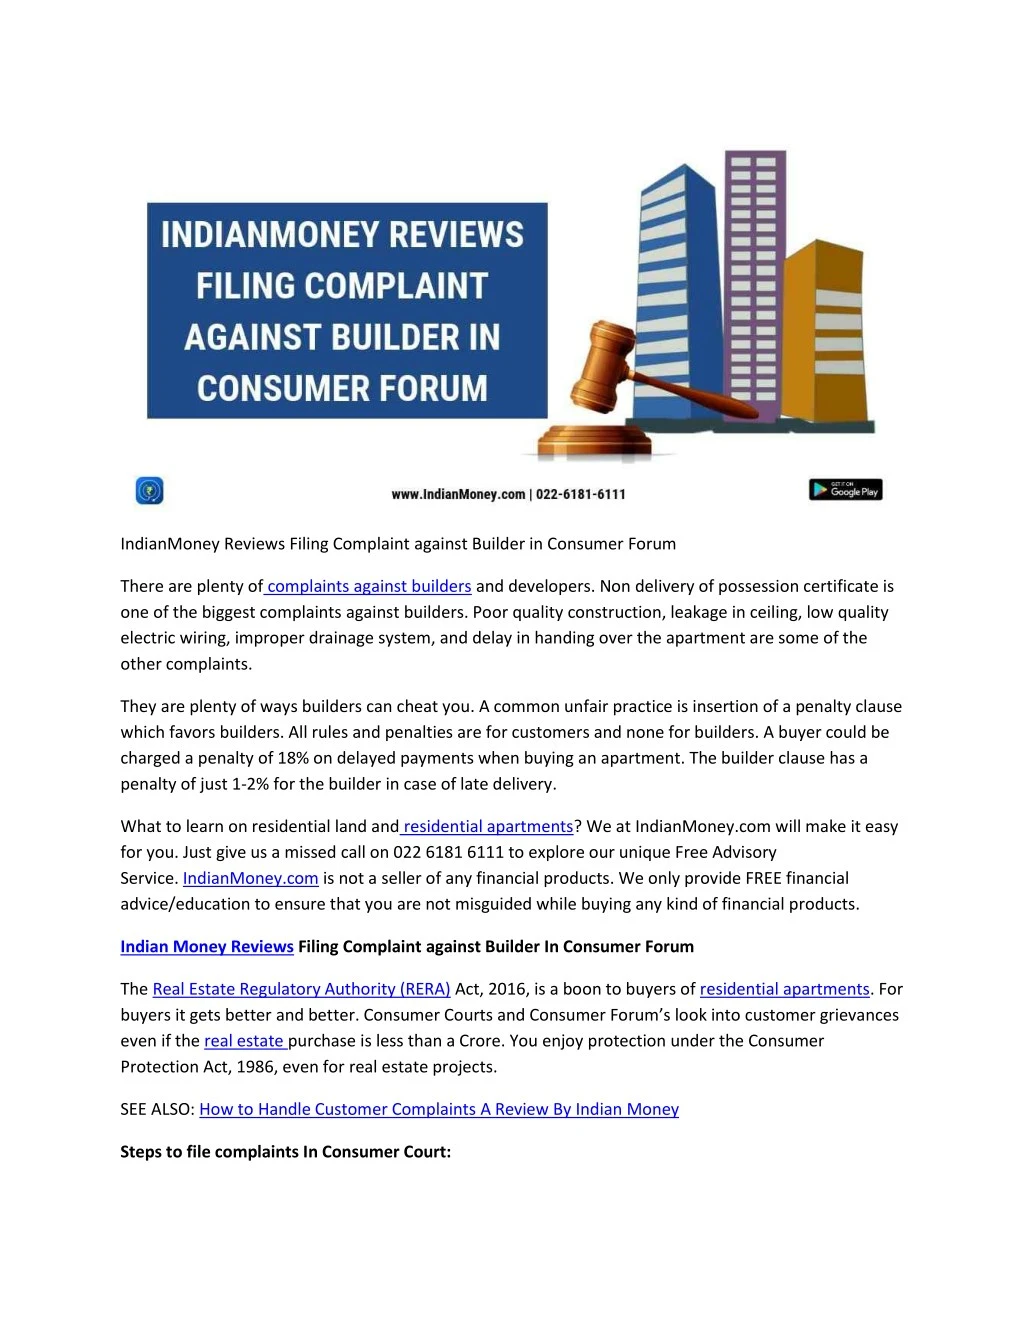 indianmoney reviews filing complaint against